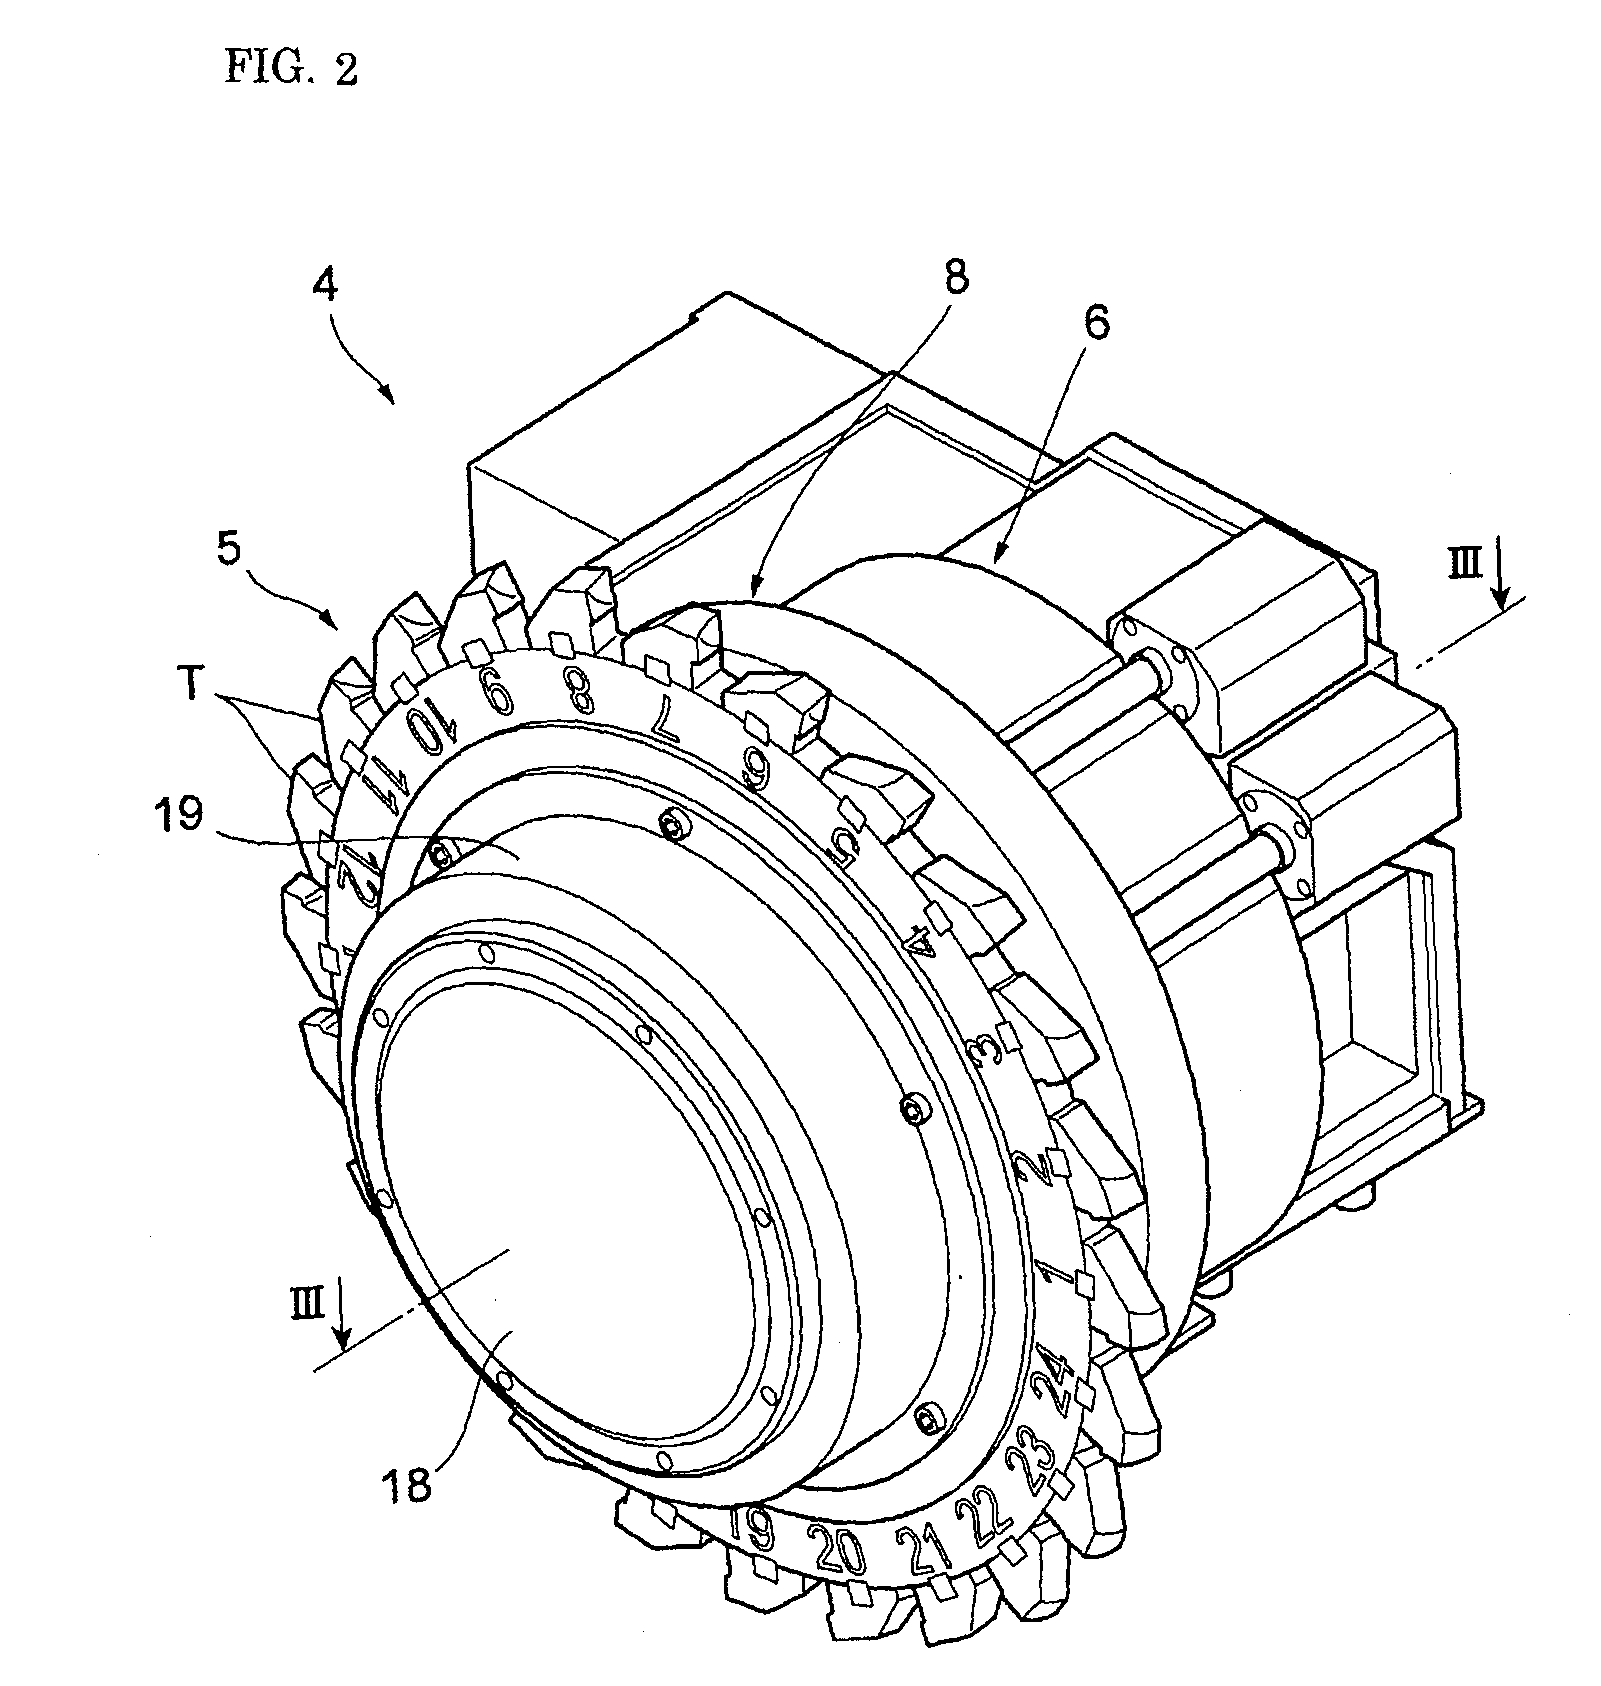 Tool holder attaching/detaching structure of machine tool